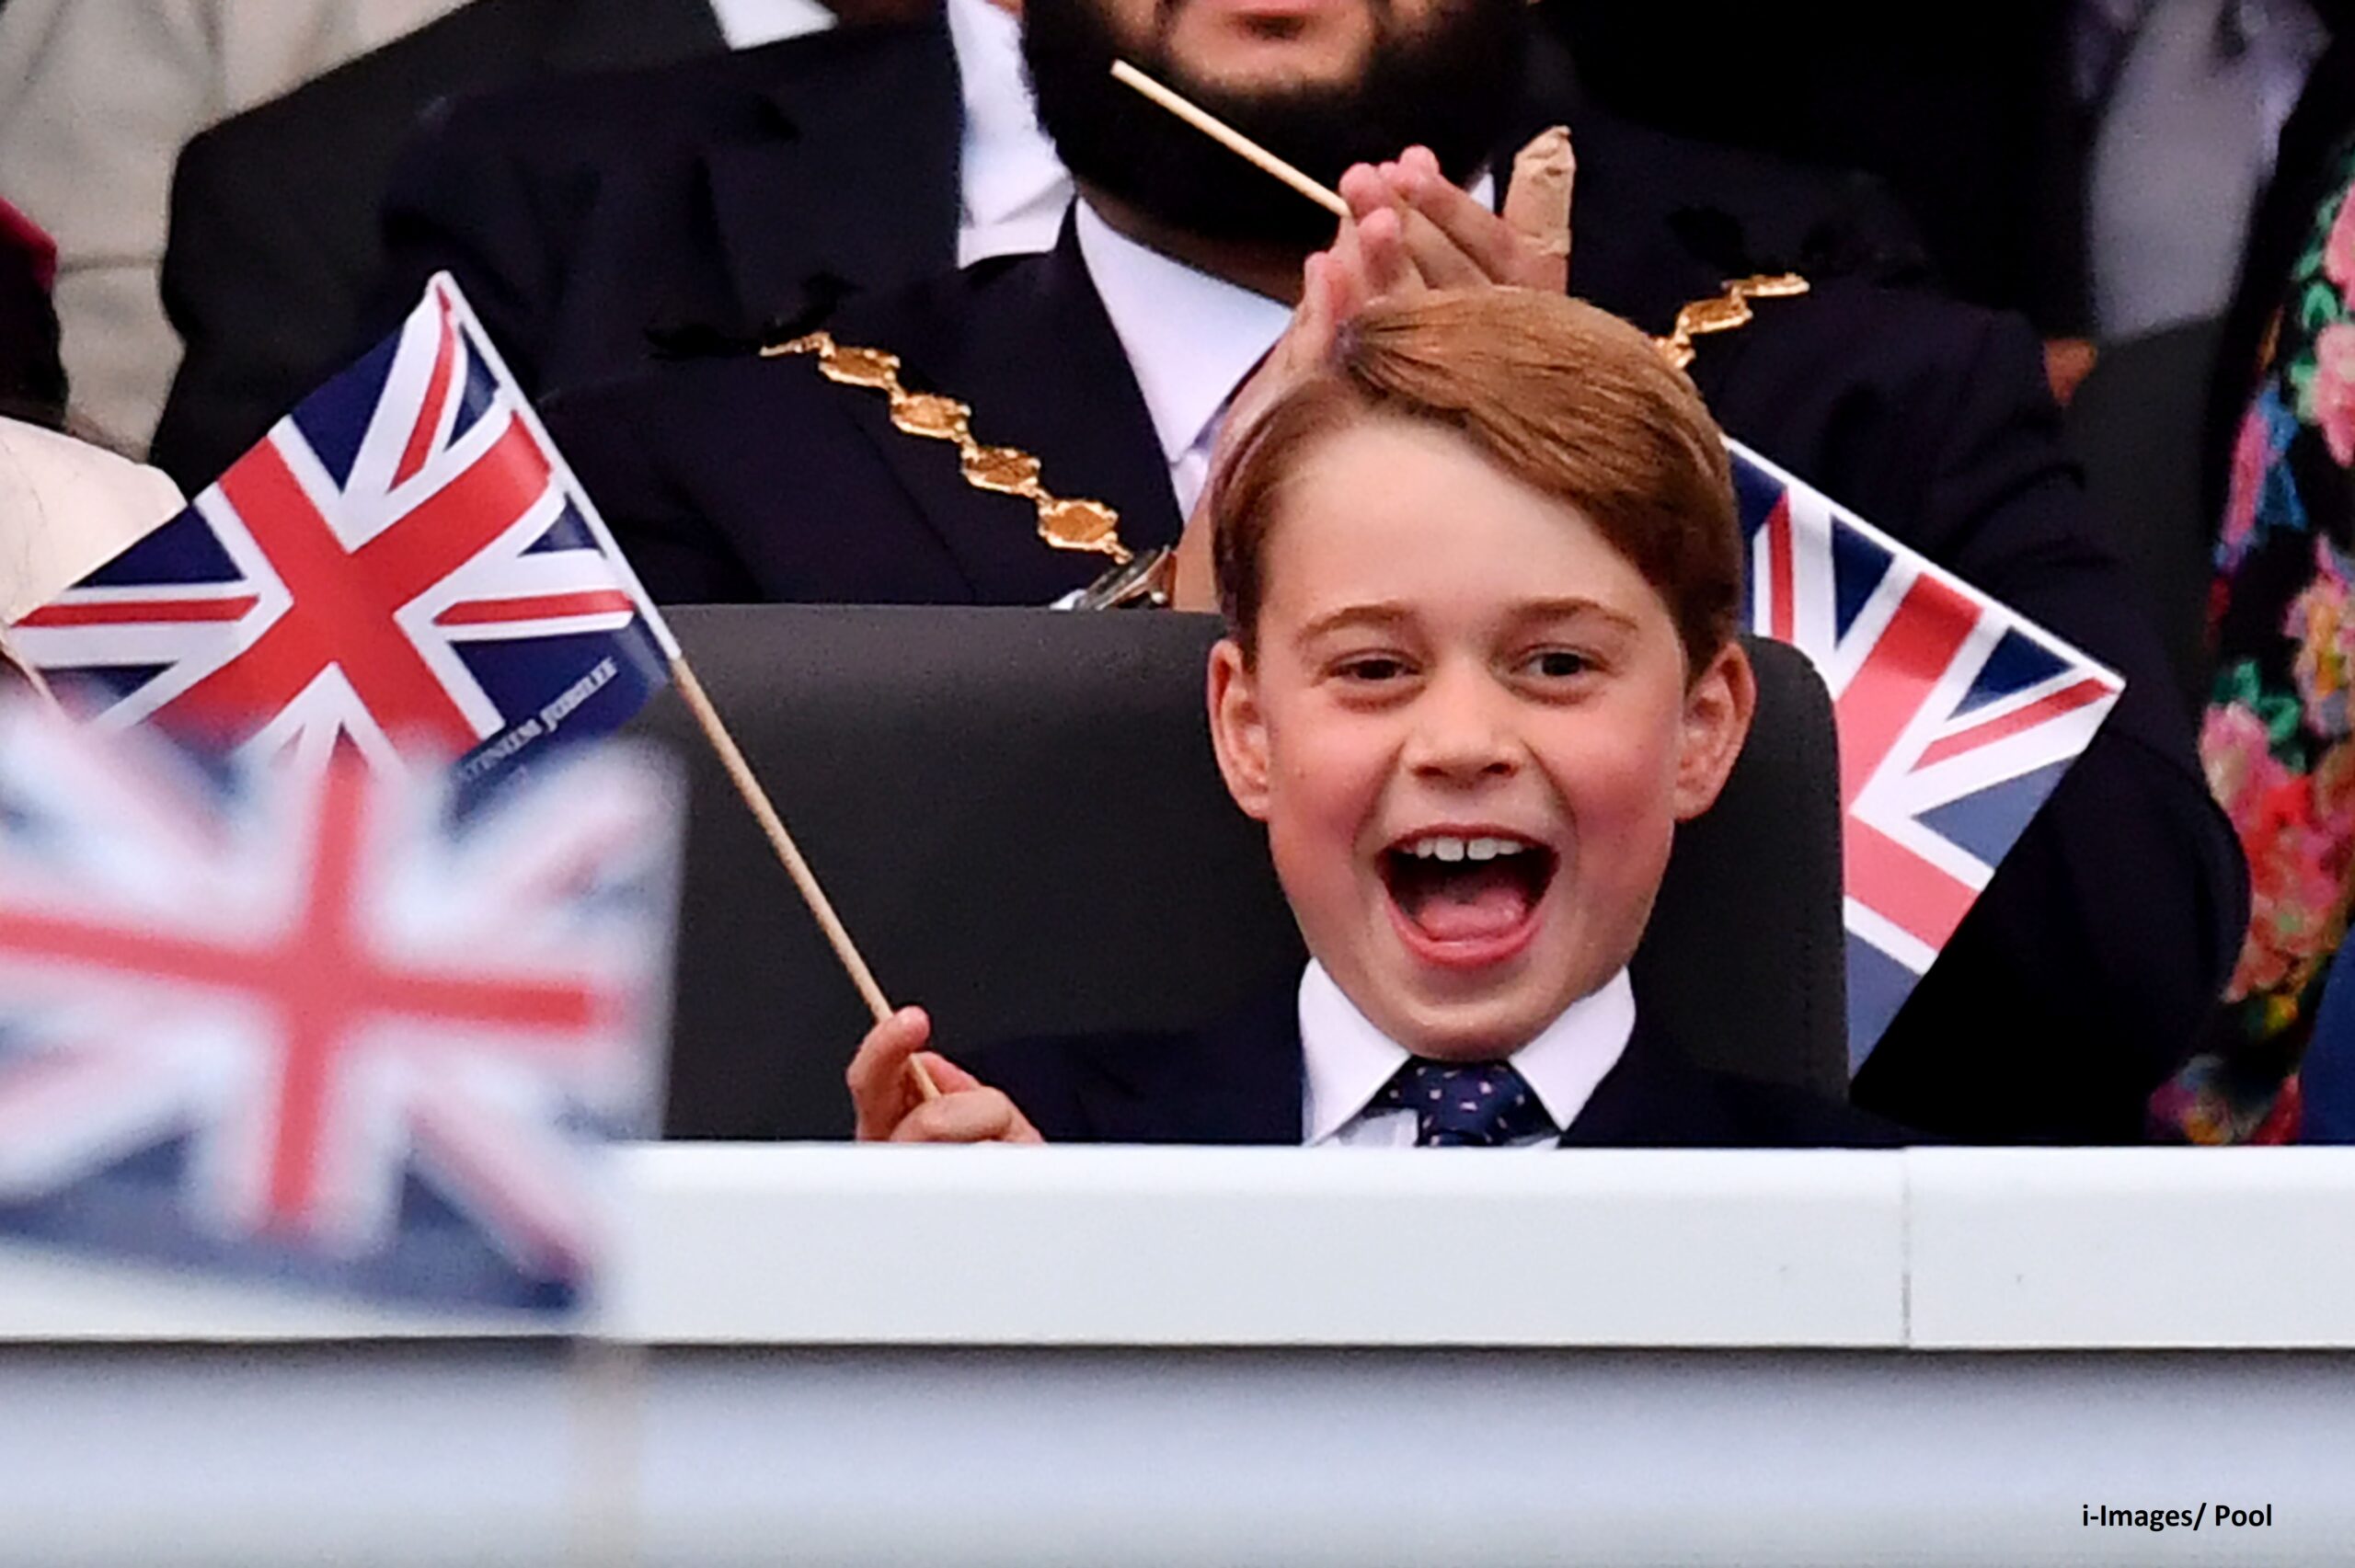 MP calls for Prince George to attend state school – Royal Central